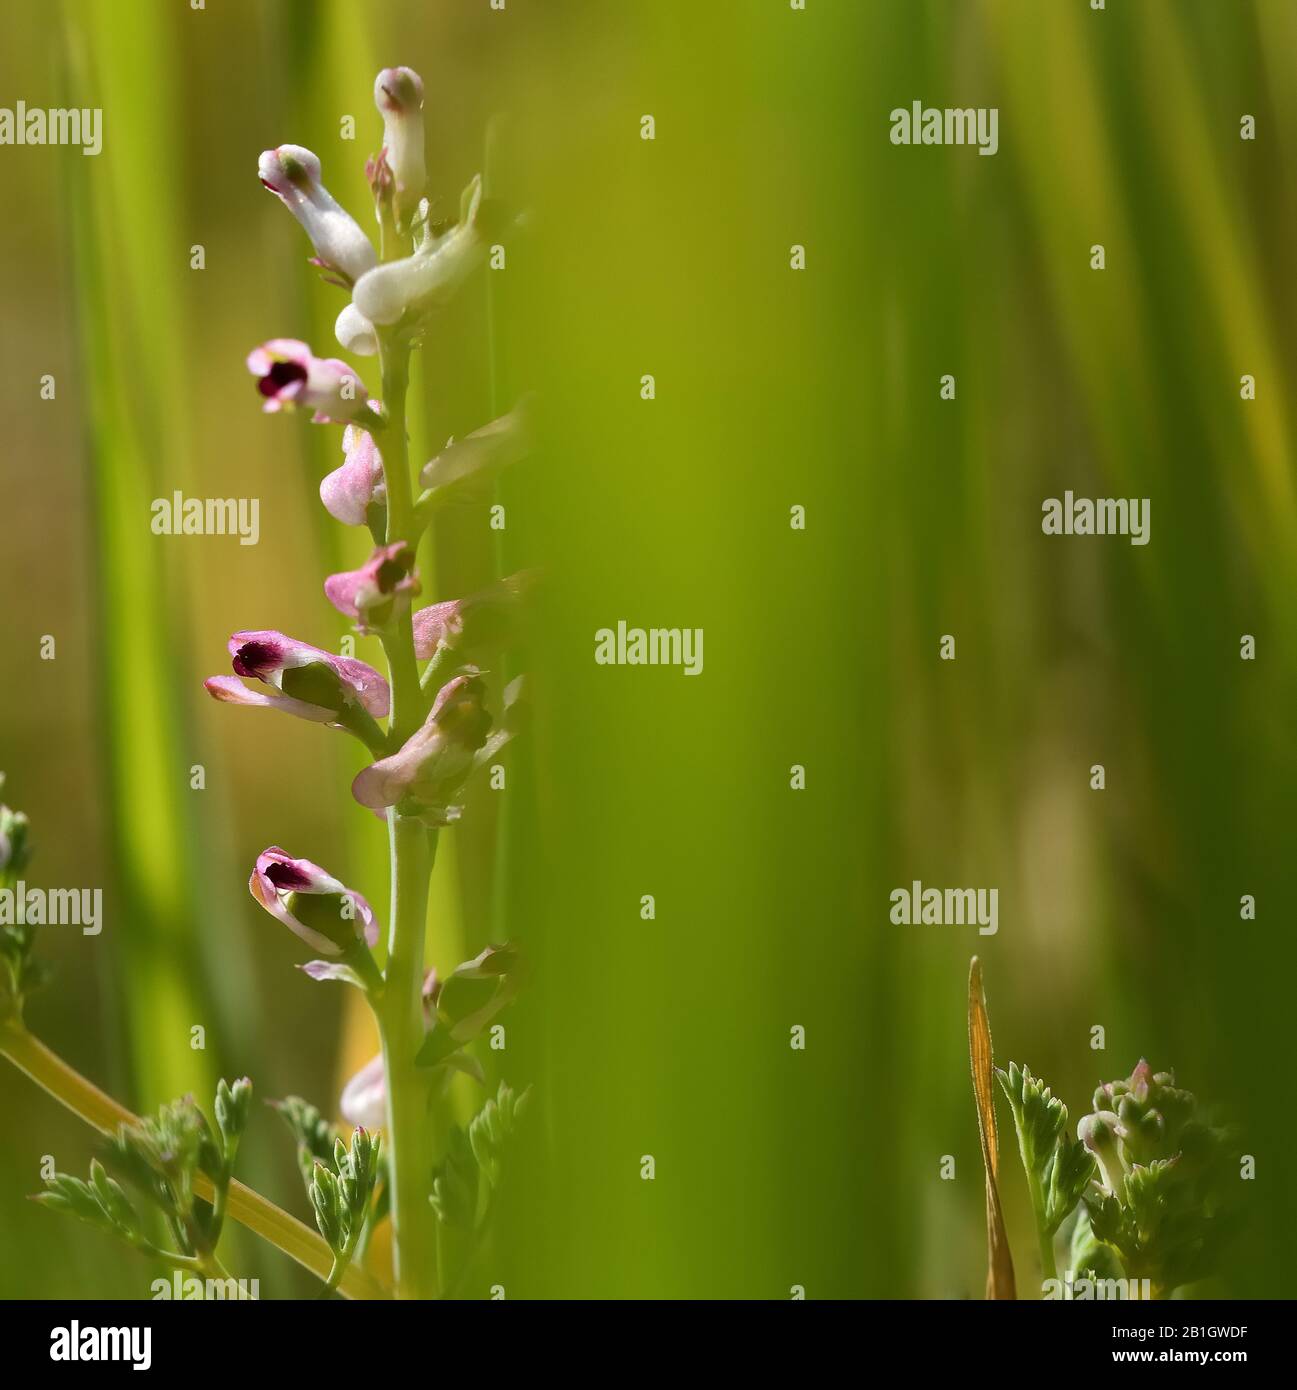 Small plant with pink wild flowers hidden in a green cereal field Stock Photo